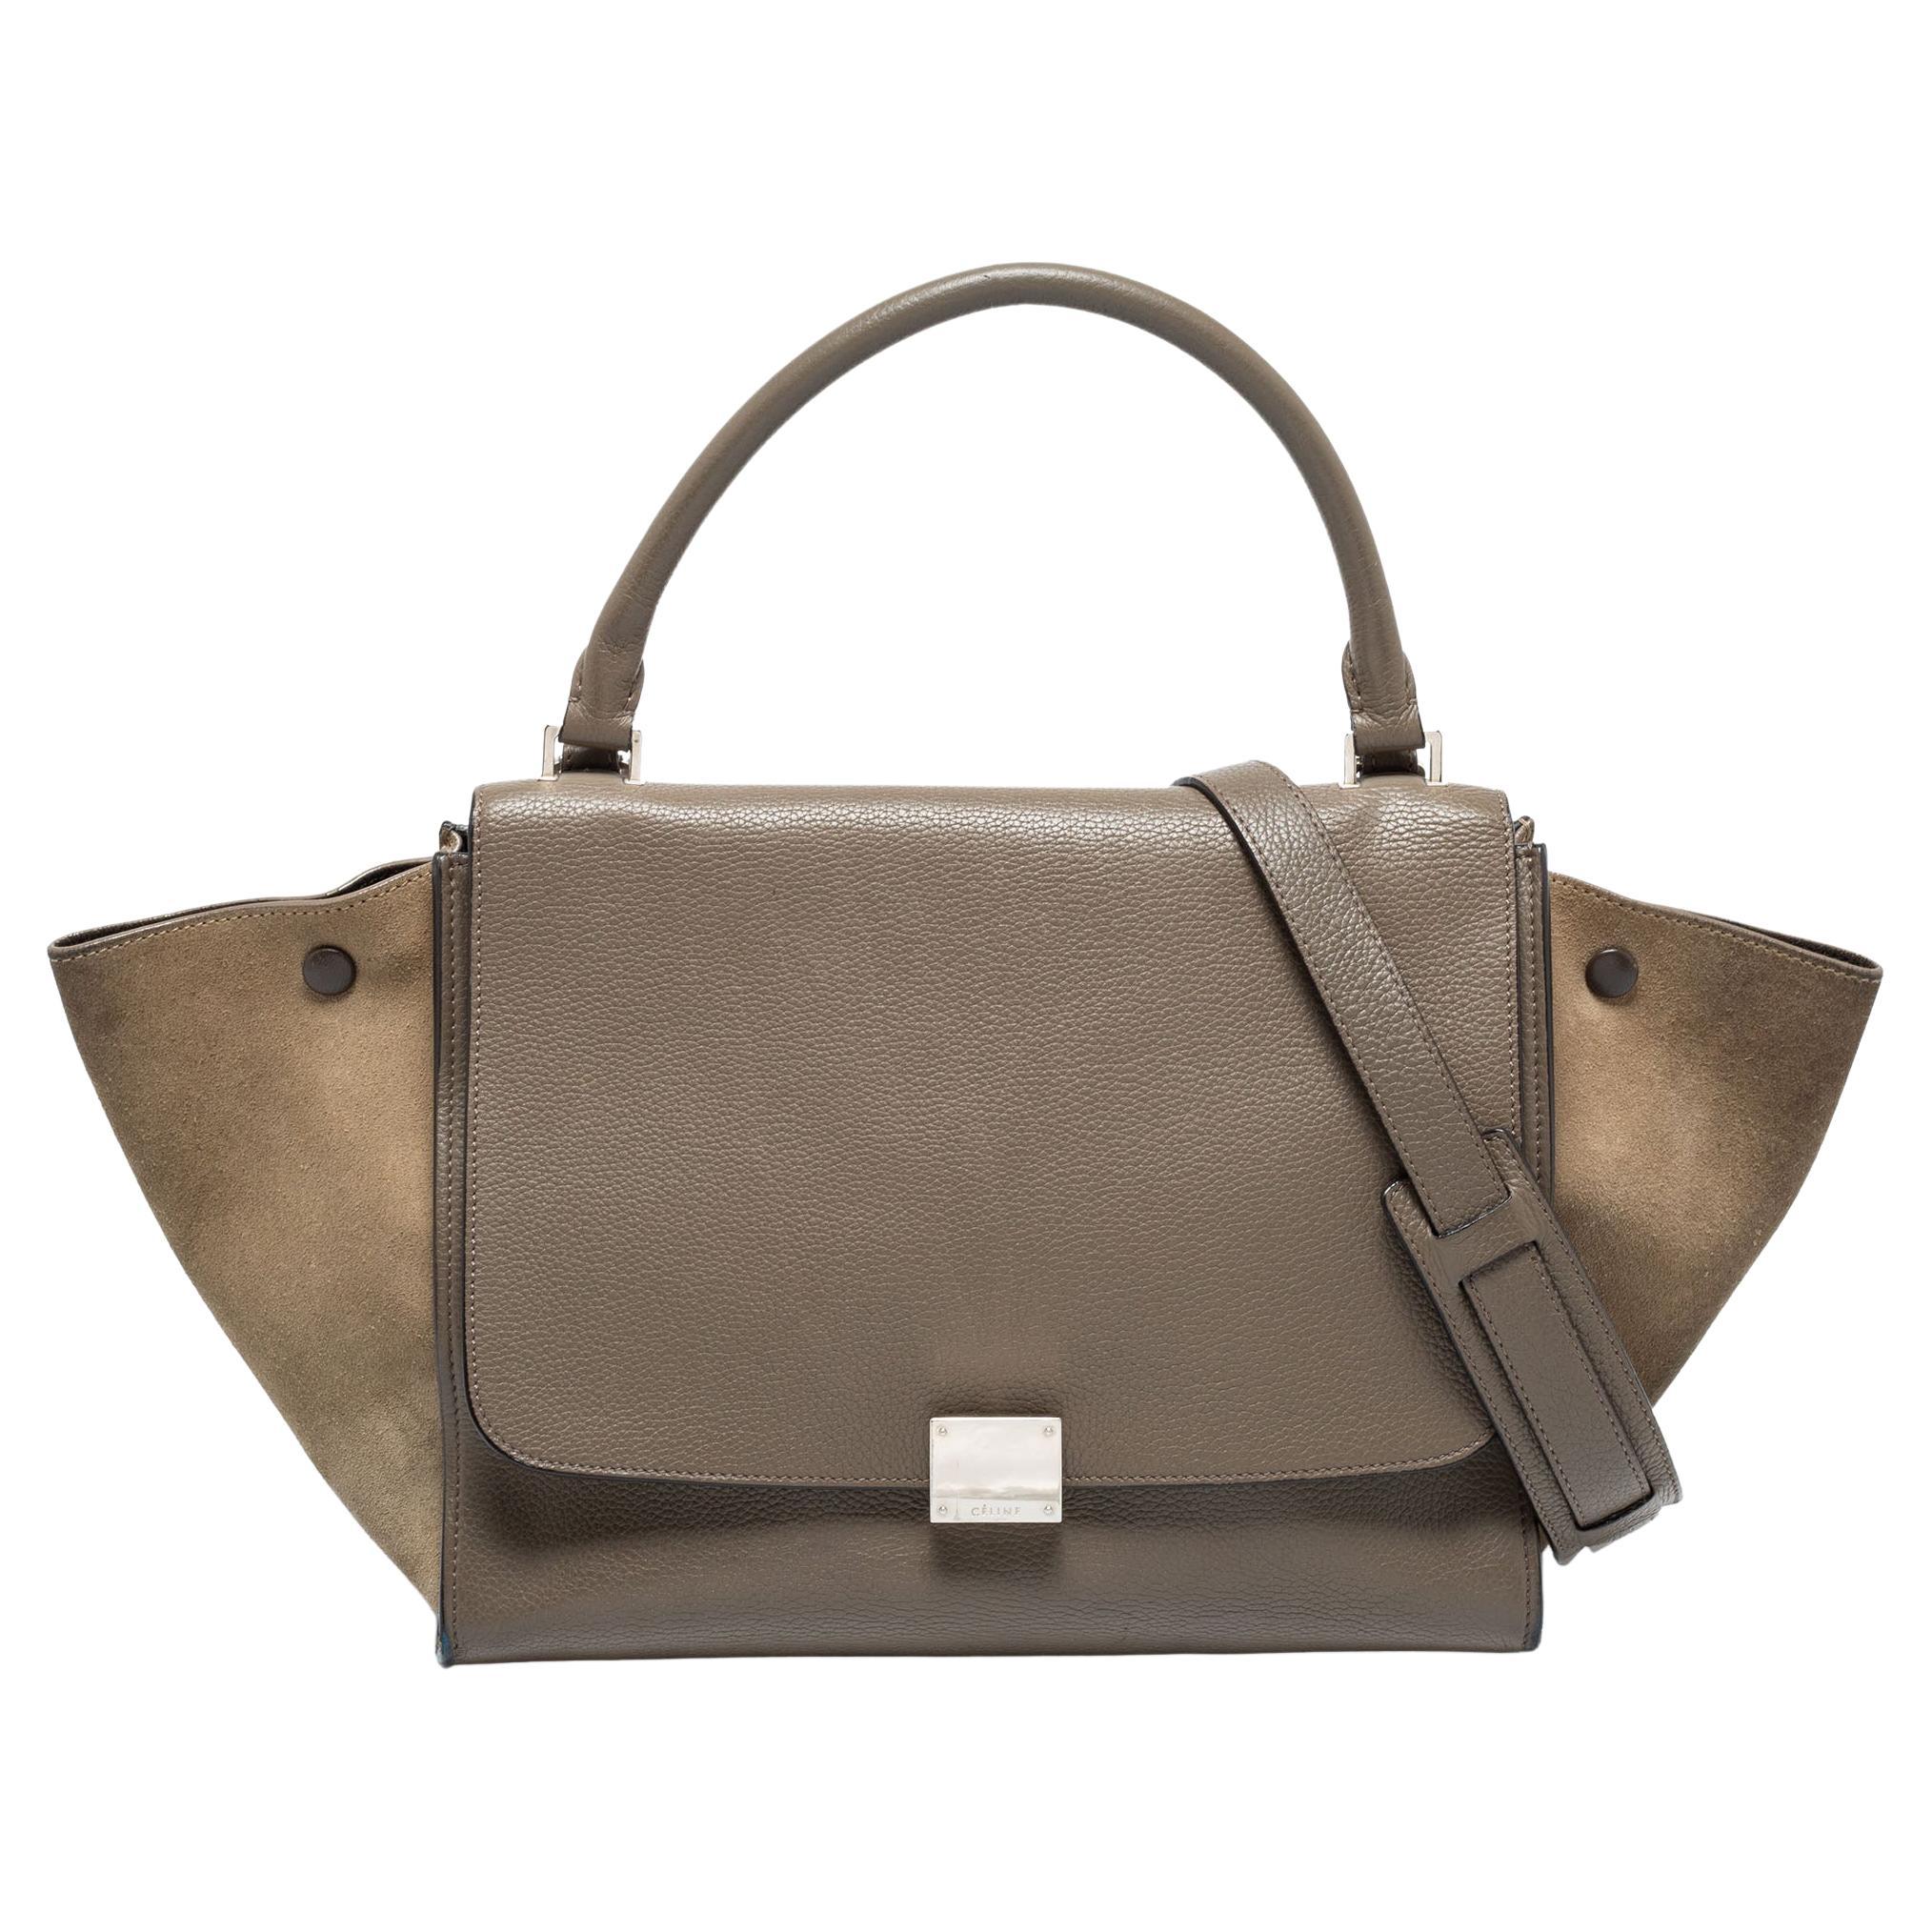 Celine Grey Leather And Suede Trapeze Medium Top Handle Bag